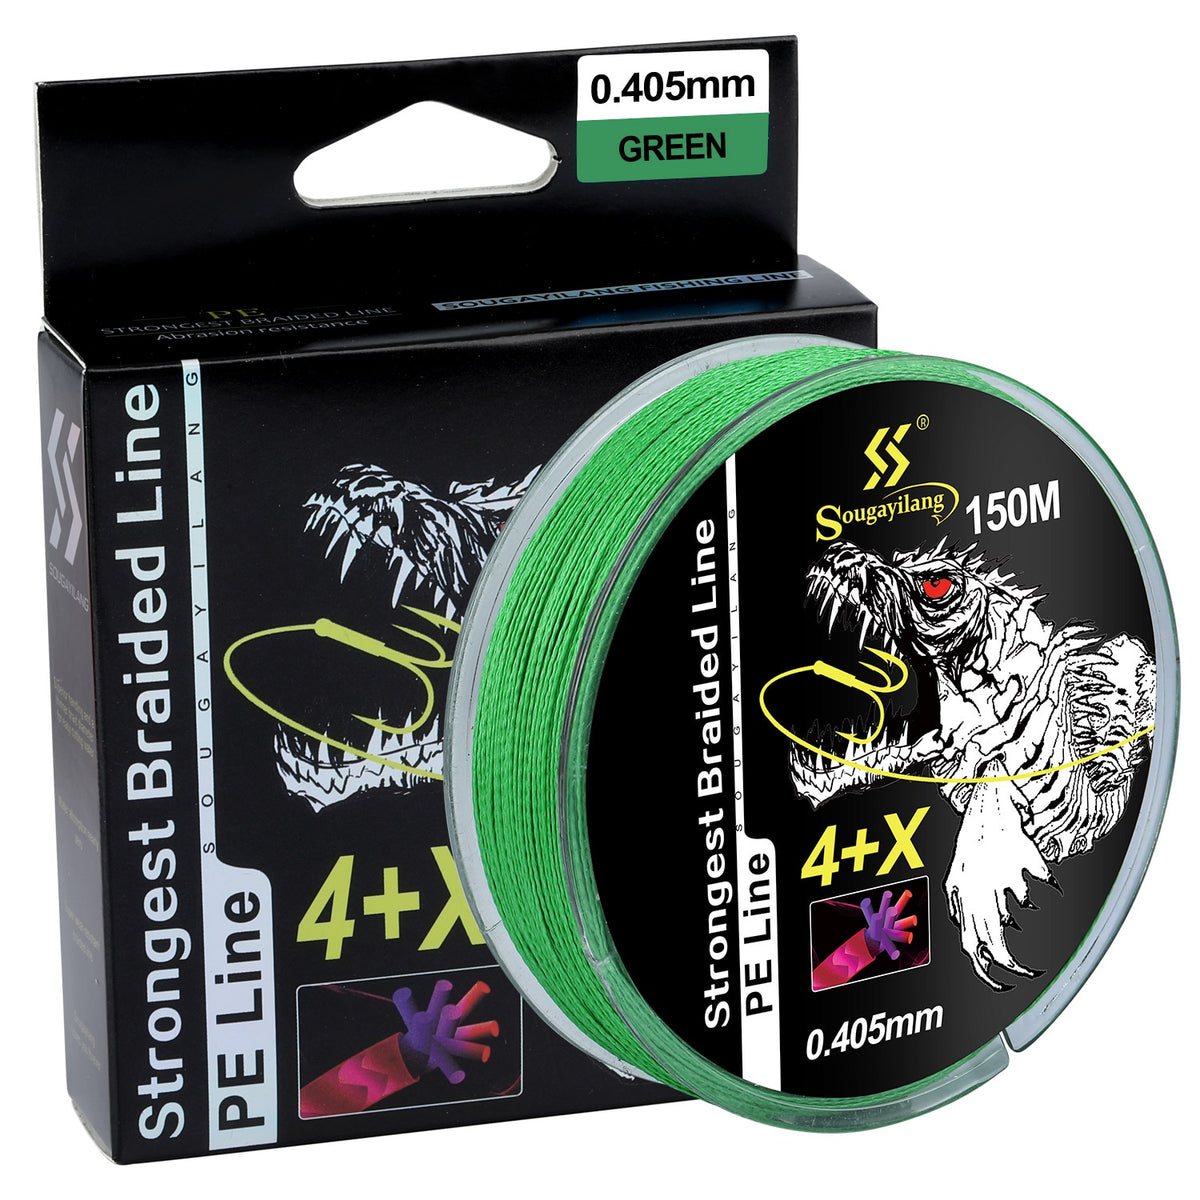 Ourlova Braided Fishing Line 500m/547yds 20lb To 80lb Advanced Durable 4 Strand Fishing Line For Saltwater & Fresh Water Surf Fishing Bass Fishing Fly